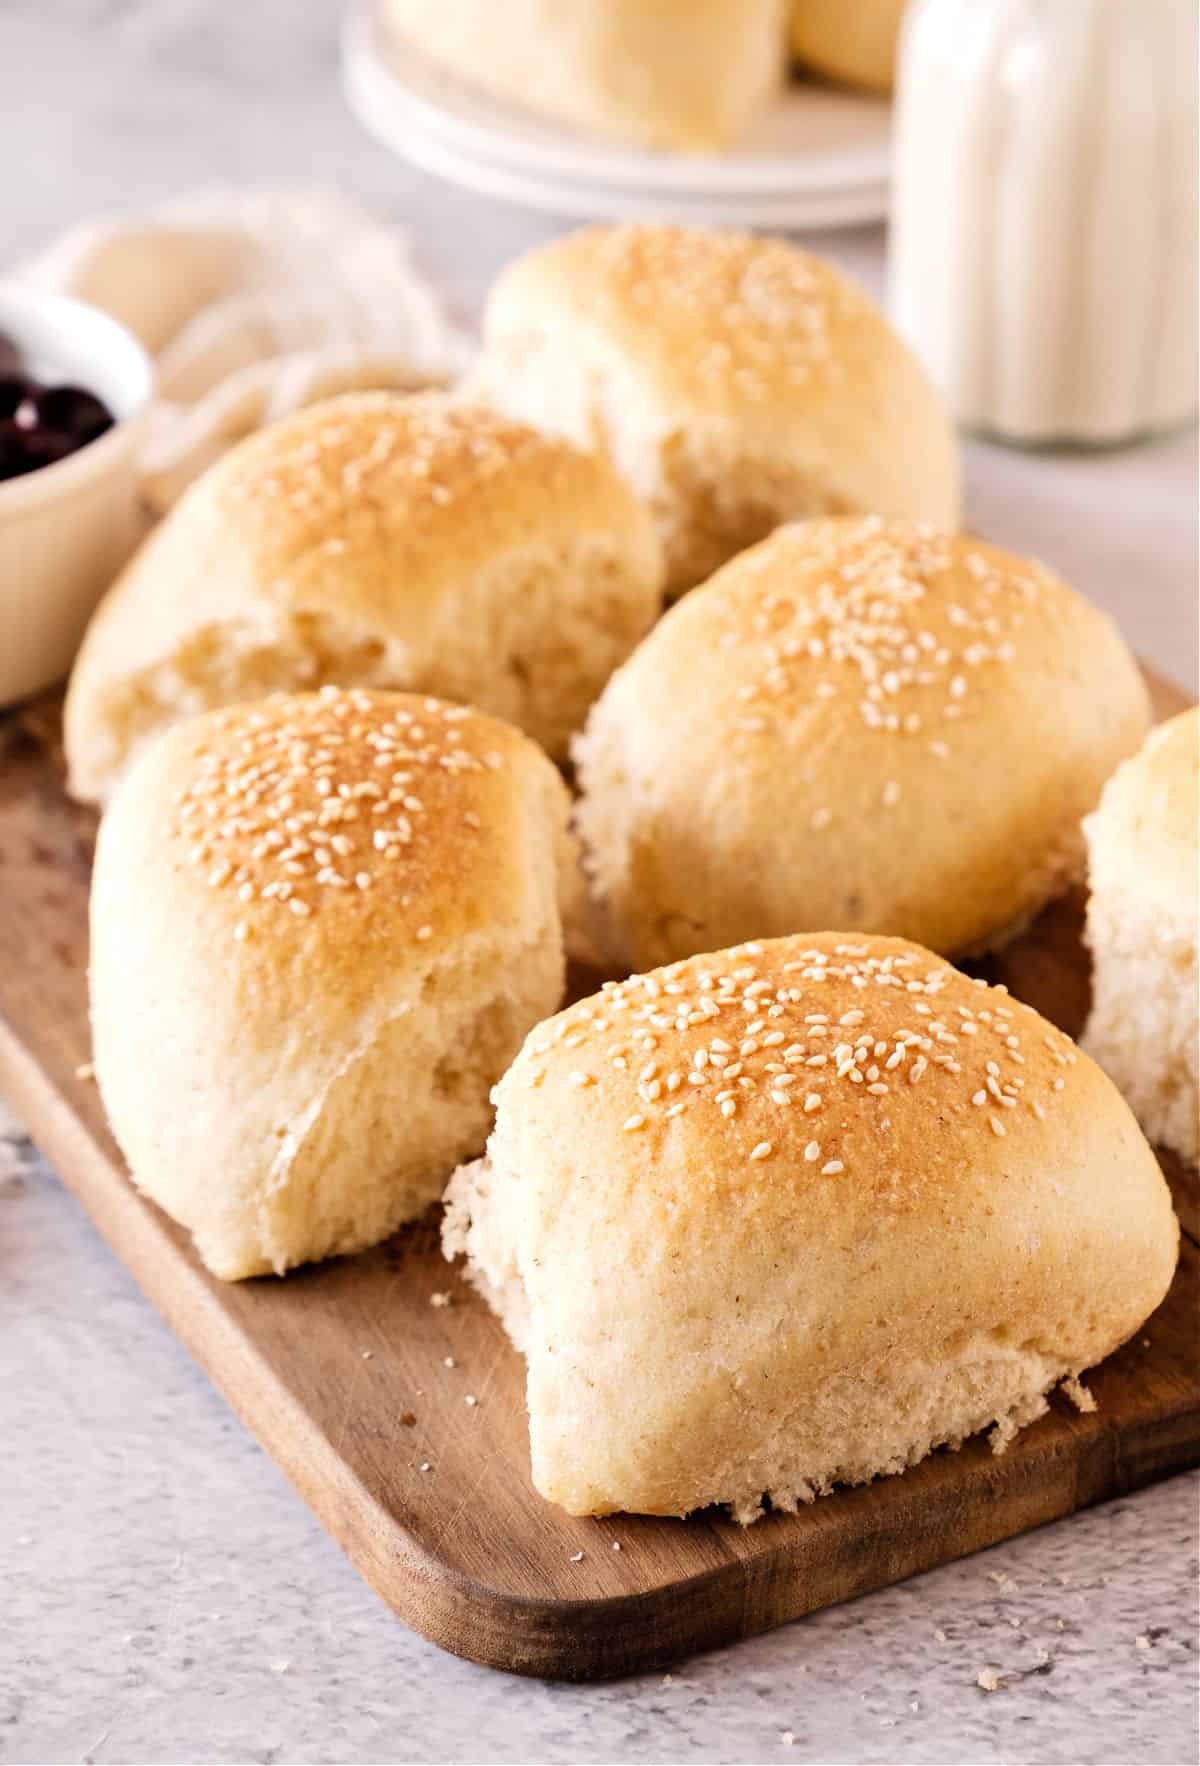 Several sesame-topped bread rolls on a wood board. Light gray surface.